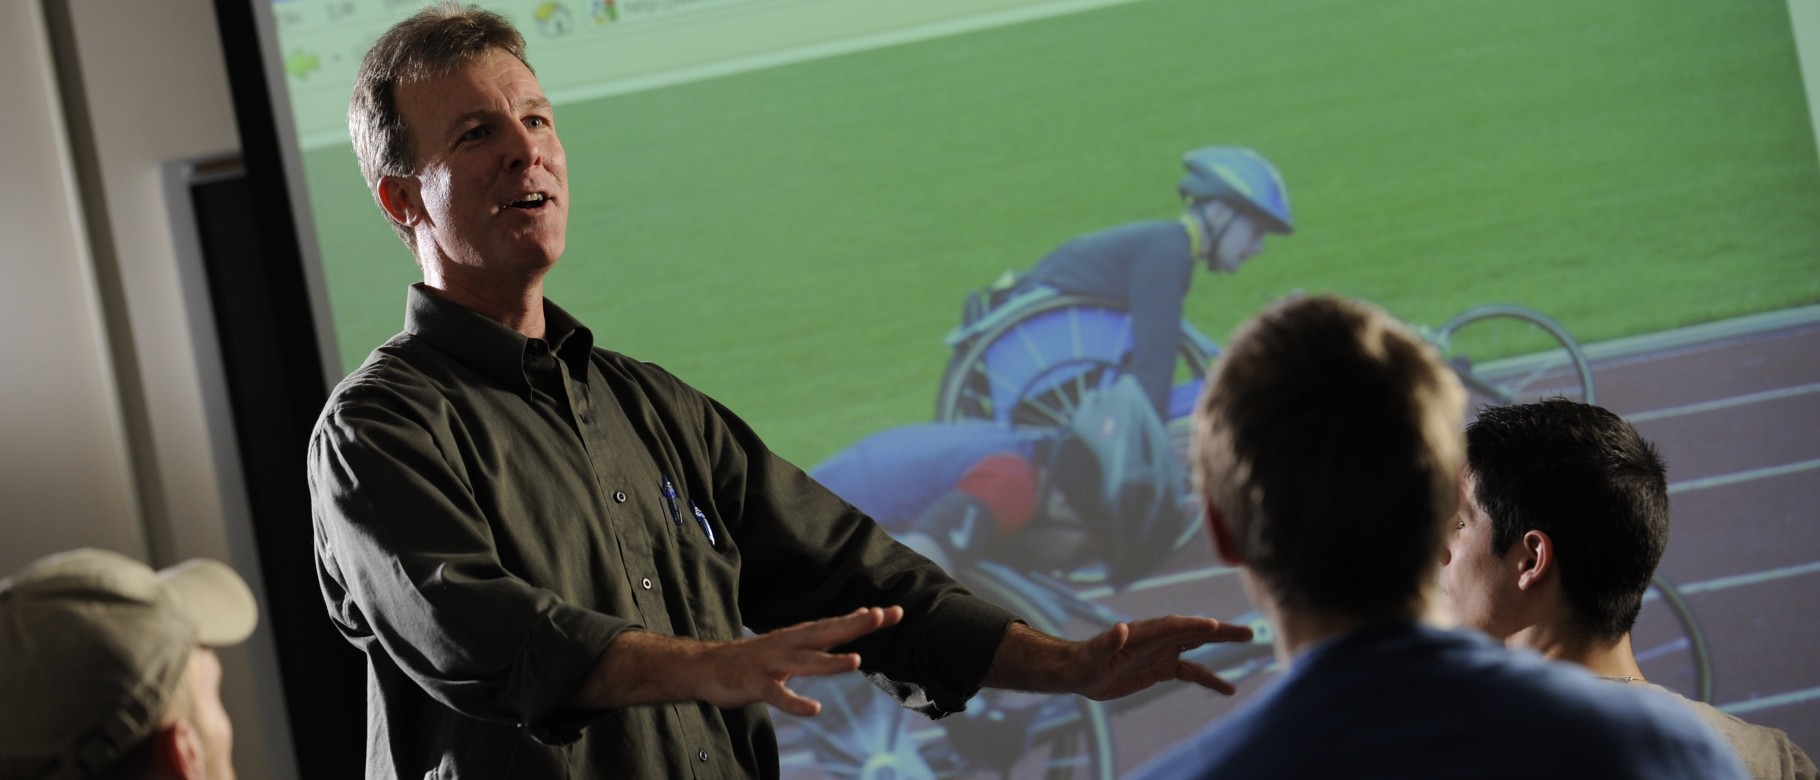 UNE Professor Jim Cavanaugh teaches students in front of a screen with cyclists in view